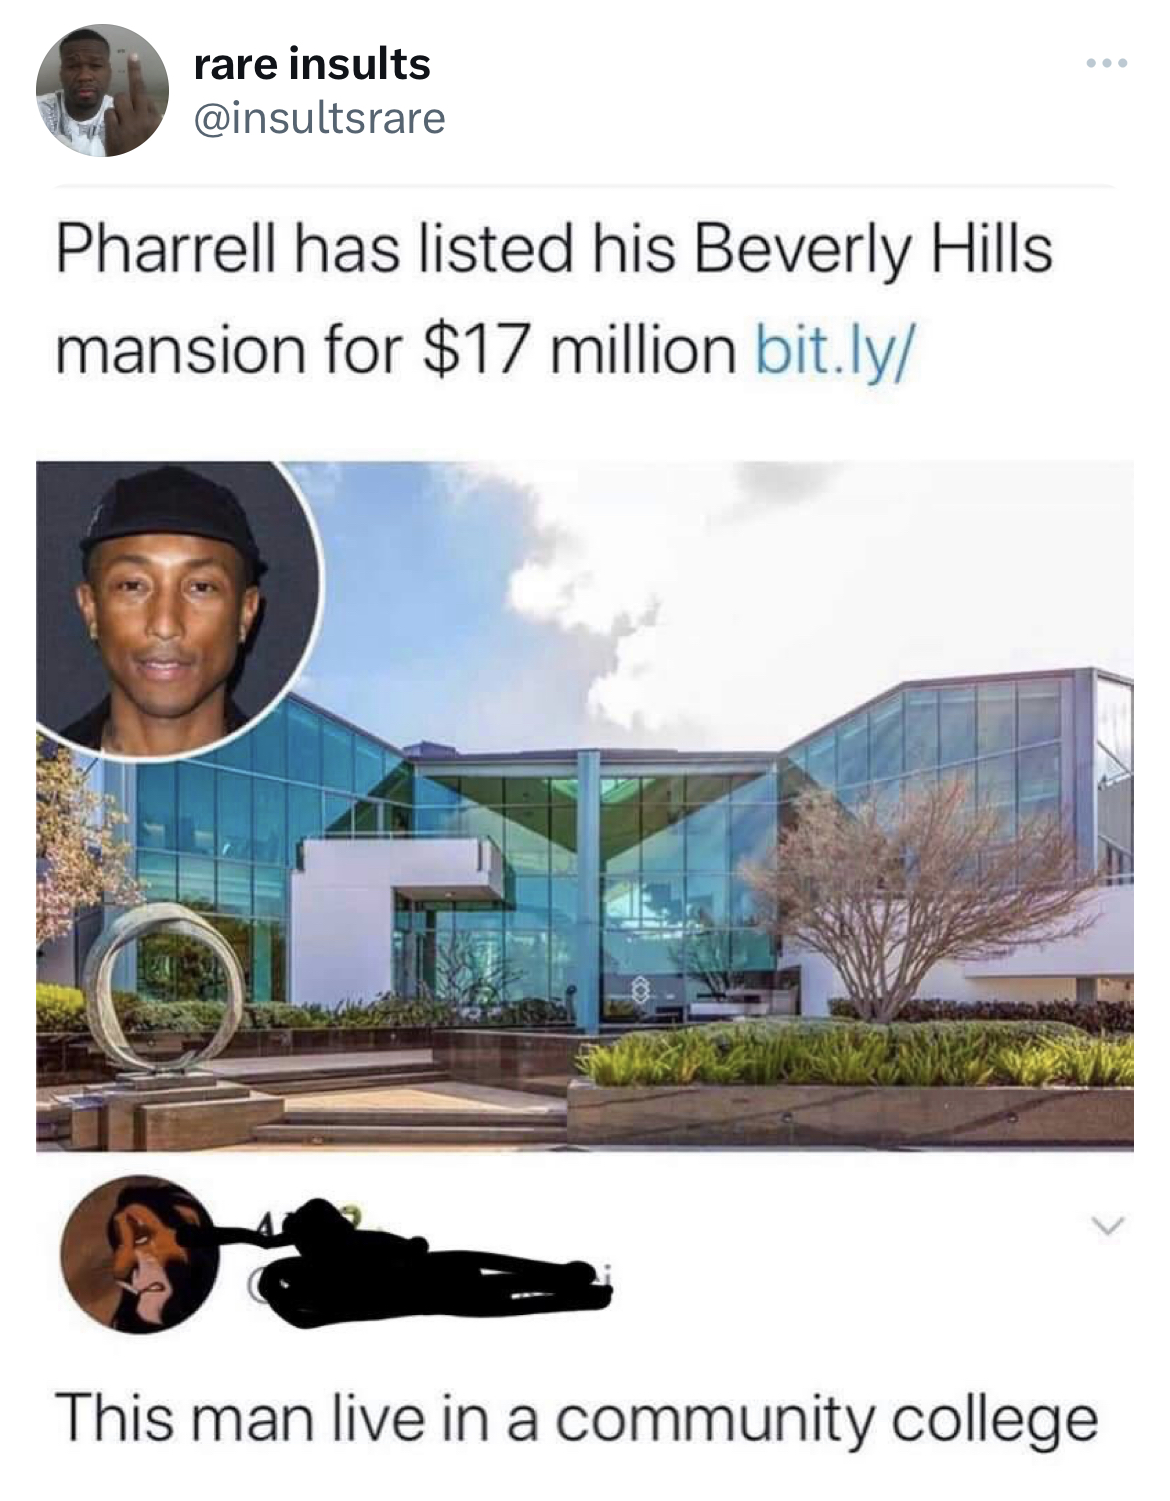 Tweets dunking on celebs - rare insults - rare insults Pharrell has listed his Beverly Hills mansion for $17 million bit.ly This man live in a community college